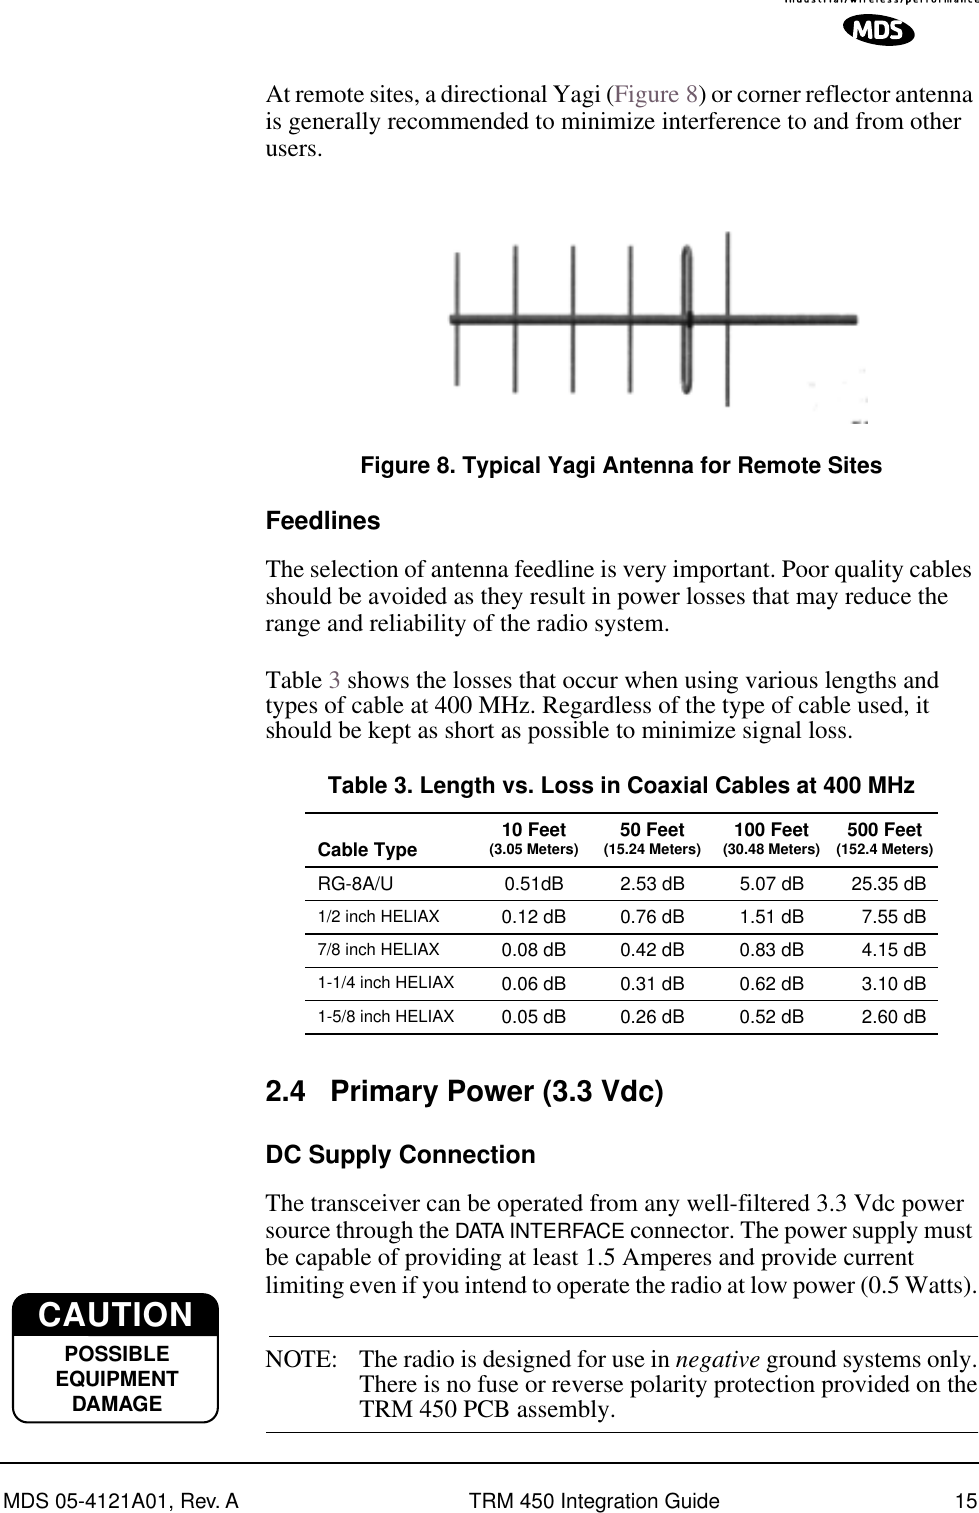  MDS 05-4121A01, Rev. A TRM 450 Integration Guide 15 At remote sites, a directional Yagi (Figure 8) or corner reflector antenna is generally recommended to minimize interference to and from other users. Invisible place holder Figure 8. Typical Yagi Antenna for Remote Sites Feedlines The selection of antenna feedline is very important. Poor quality cables should be avoided as they result in power losses that may reduce the range and reliability of the radio system.Table 3 shows the losses that occur when using various lengths and types of cable at 400 MHz. Regardless of the type of cable used, it should be kept as short as possible to minimize signal loss.  2.4 Primary Power (3.3 Vdc) DC Supply Connection The transceiver can be operated from any well-filtered 3.3 Vdc power source through the  DATA INTERFACE  connector. The power supply must be capable of providing at least 1.5 Amperes and provide current limiting even if you intend to operate the radio at low power (0.5 Watts). NOTE: The radio is designed for use in  negative ground systems only.There is no fuse or reverse polarity protection provided on theTRM 450 PCB assembly.Table 3. Length vs. Loss in Coaxial Cables at 400 MHzCable Type  10 Feet(3.05 Meters) 50 Feet(15.24 Meters) 100 Feet(30.48 Meters) 500 Feet(152.4 Meters)RG-8A/U 0.51dB 2.53 dB 5.07 dB 25.35 dB1/2 inch HELIAX 0.12 dB 0.76 dB 1.51 dB 7.55 dB7/8 inch HELIAX 0.08 dB 0.42 dB 0.83 dB 4.15 dB1-1/4 inch HELIAX 0.06 dB 0.31 dB 0.62 dB 3.10 dB1-5/8 inch HELIAX 0.05 dB 0.26 dB 0.52 dB 2.60 dBCAUTIONPOSSIBLEEQUIPMENTDAMAGE